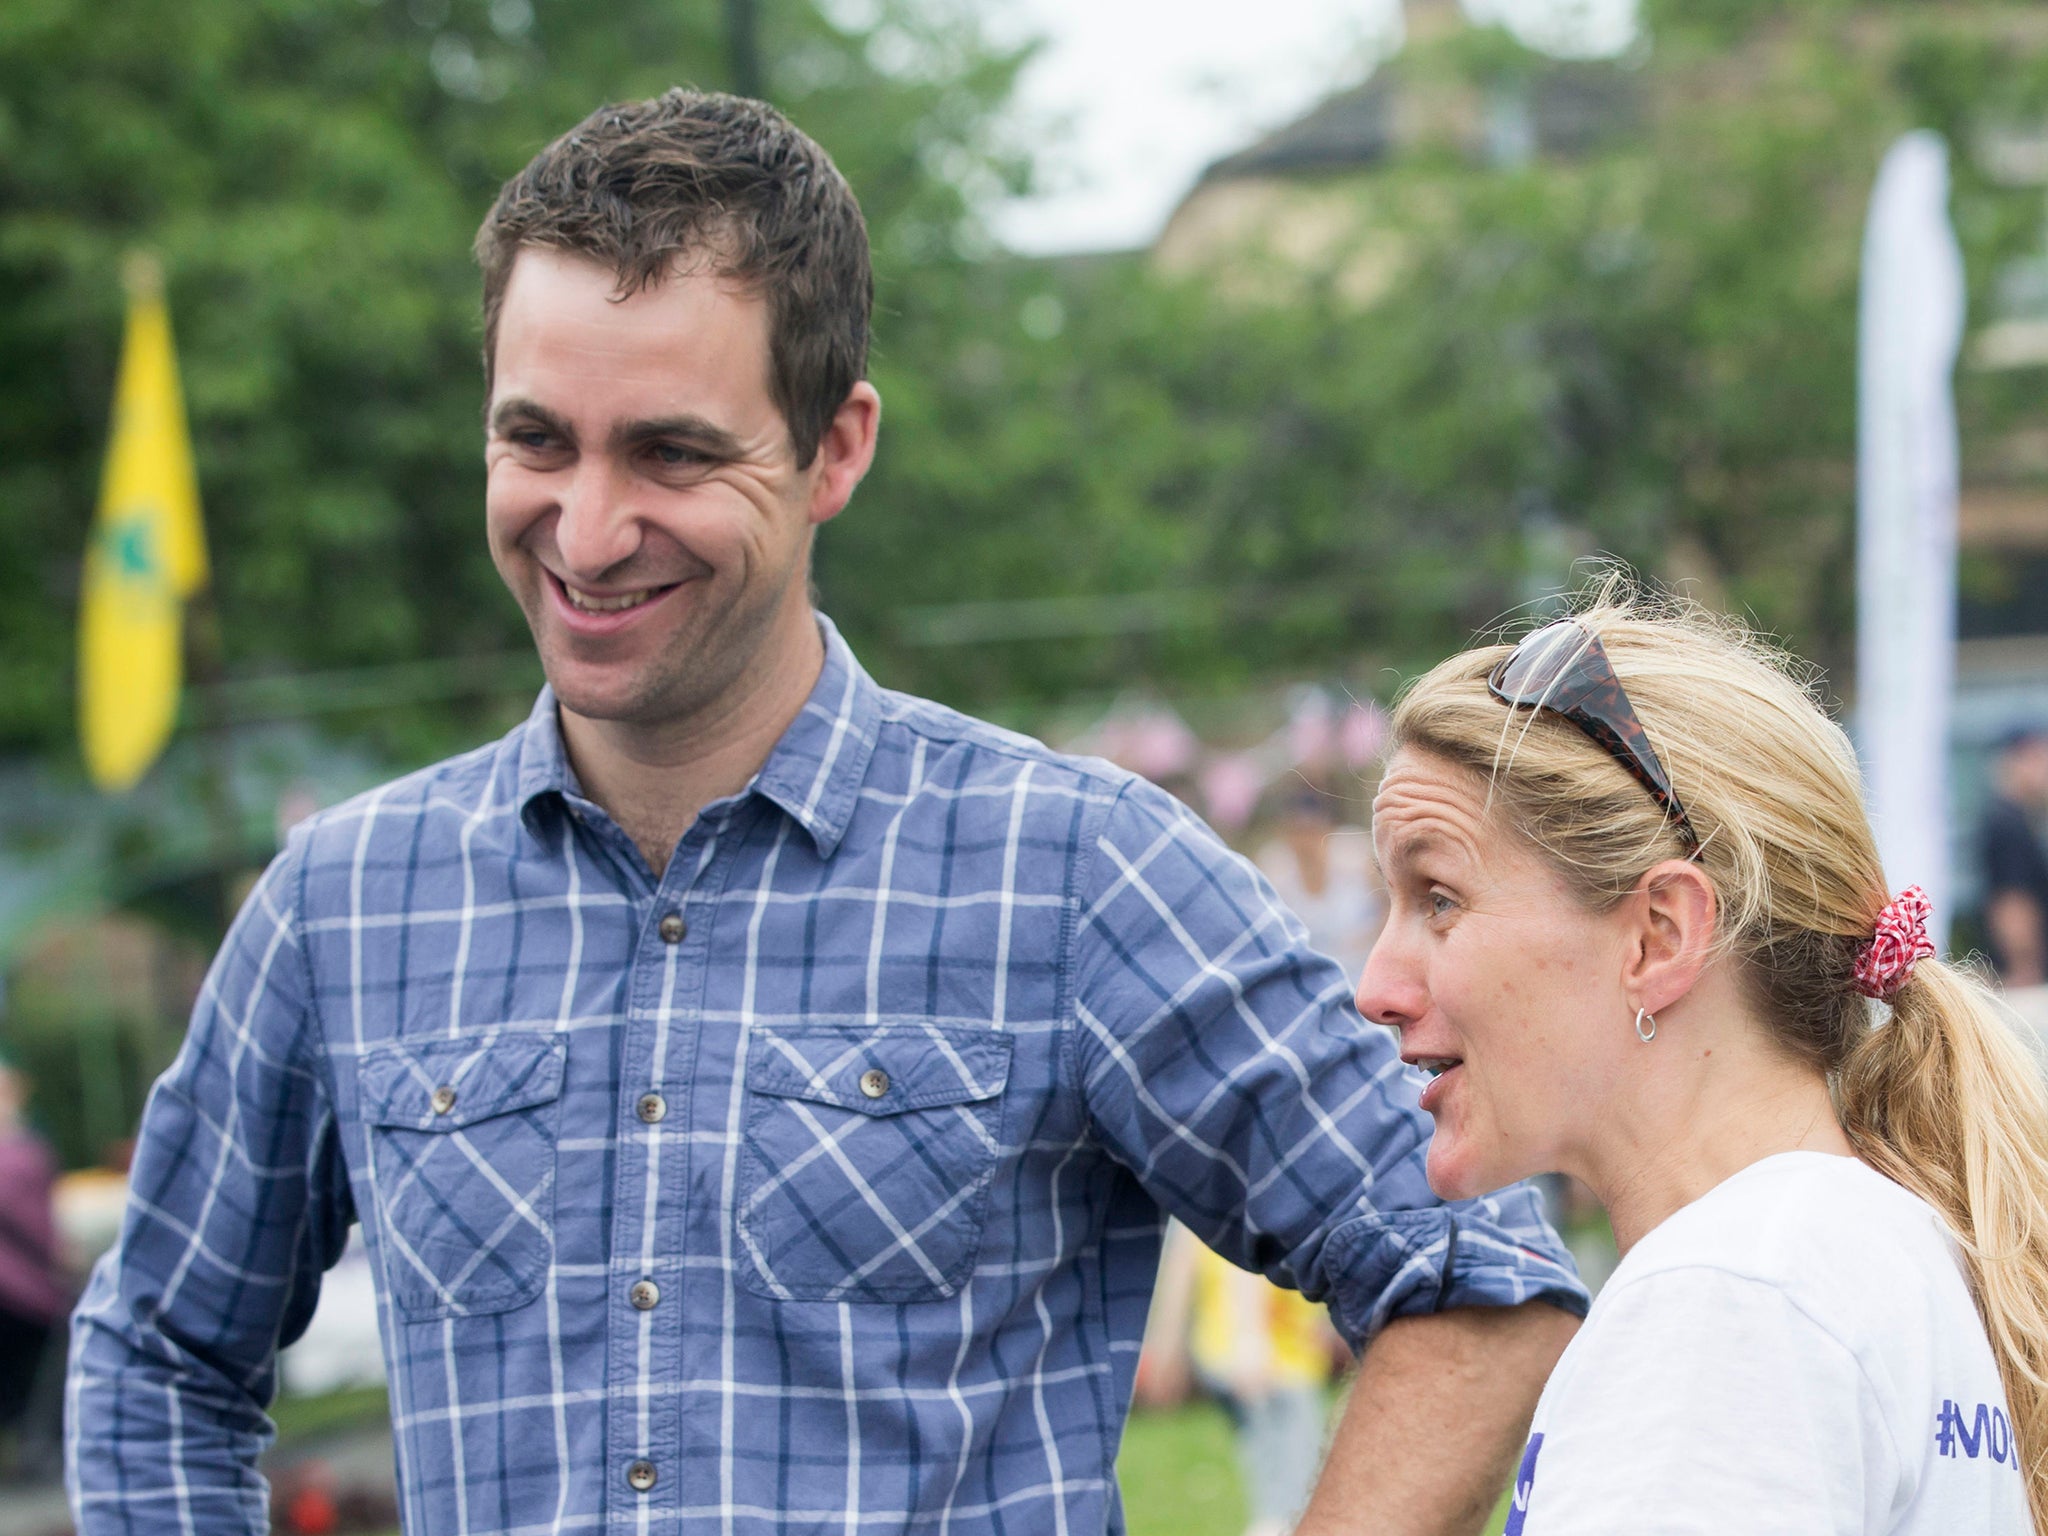 Brendan Cox and Kim Leadbeater, husband and sister of murdered MP Jo Cox, attend a Great Get Together event marking the anniversary of Ms Cox’s death, at Yorkshire